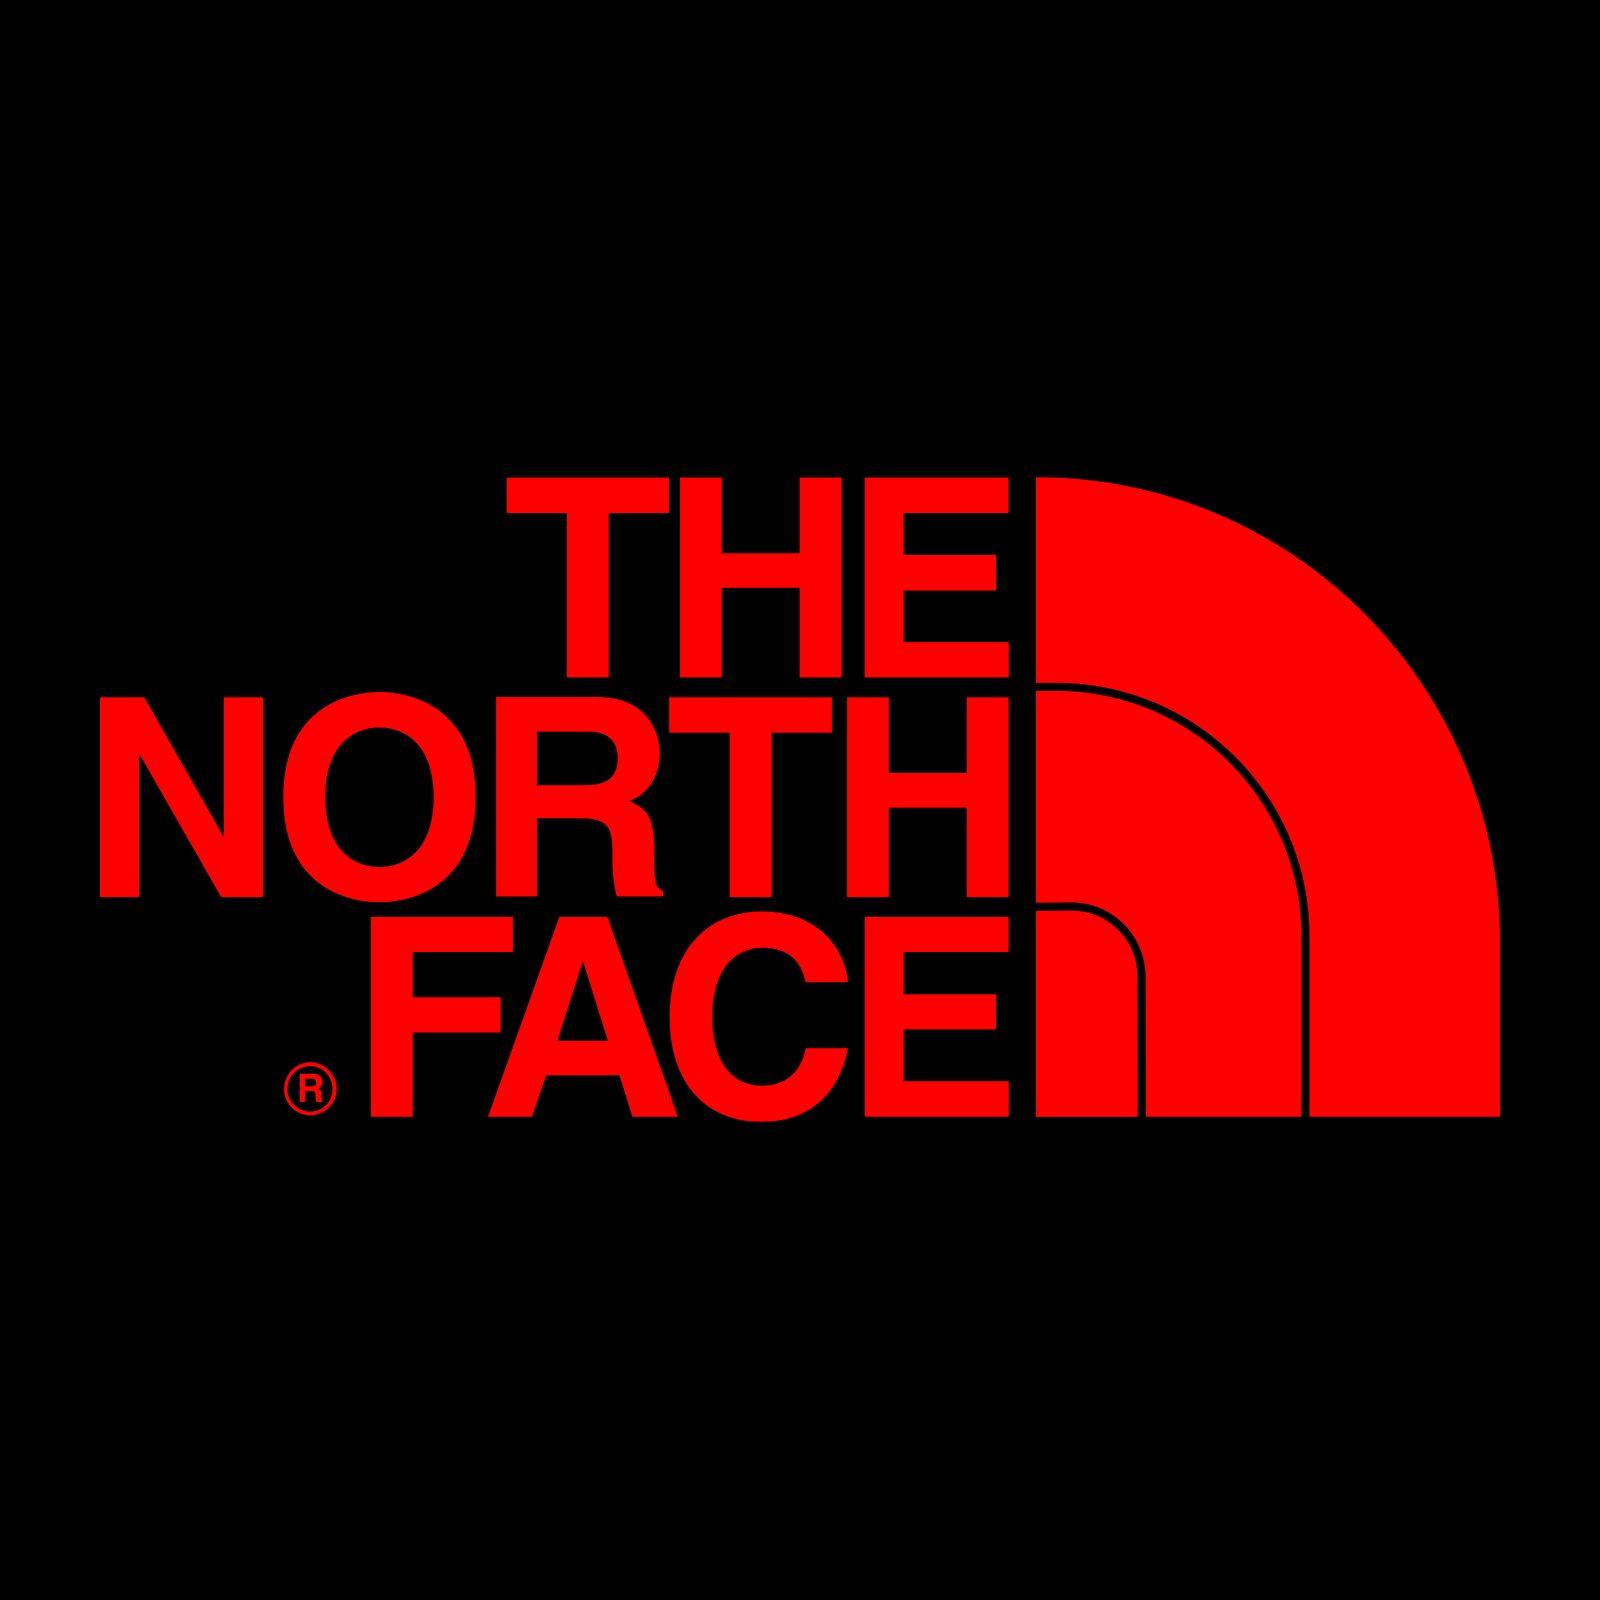 North Face Logo - North Face Logo, North Face Symbol, Meaning, History and Evolution